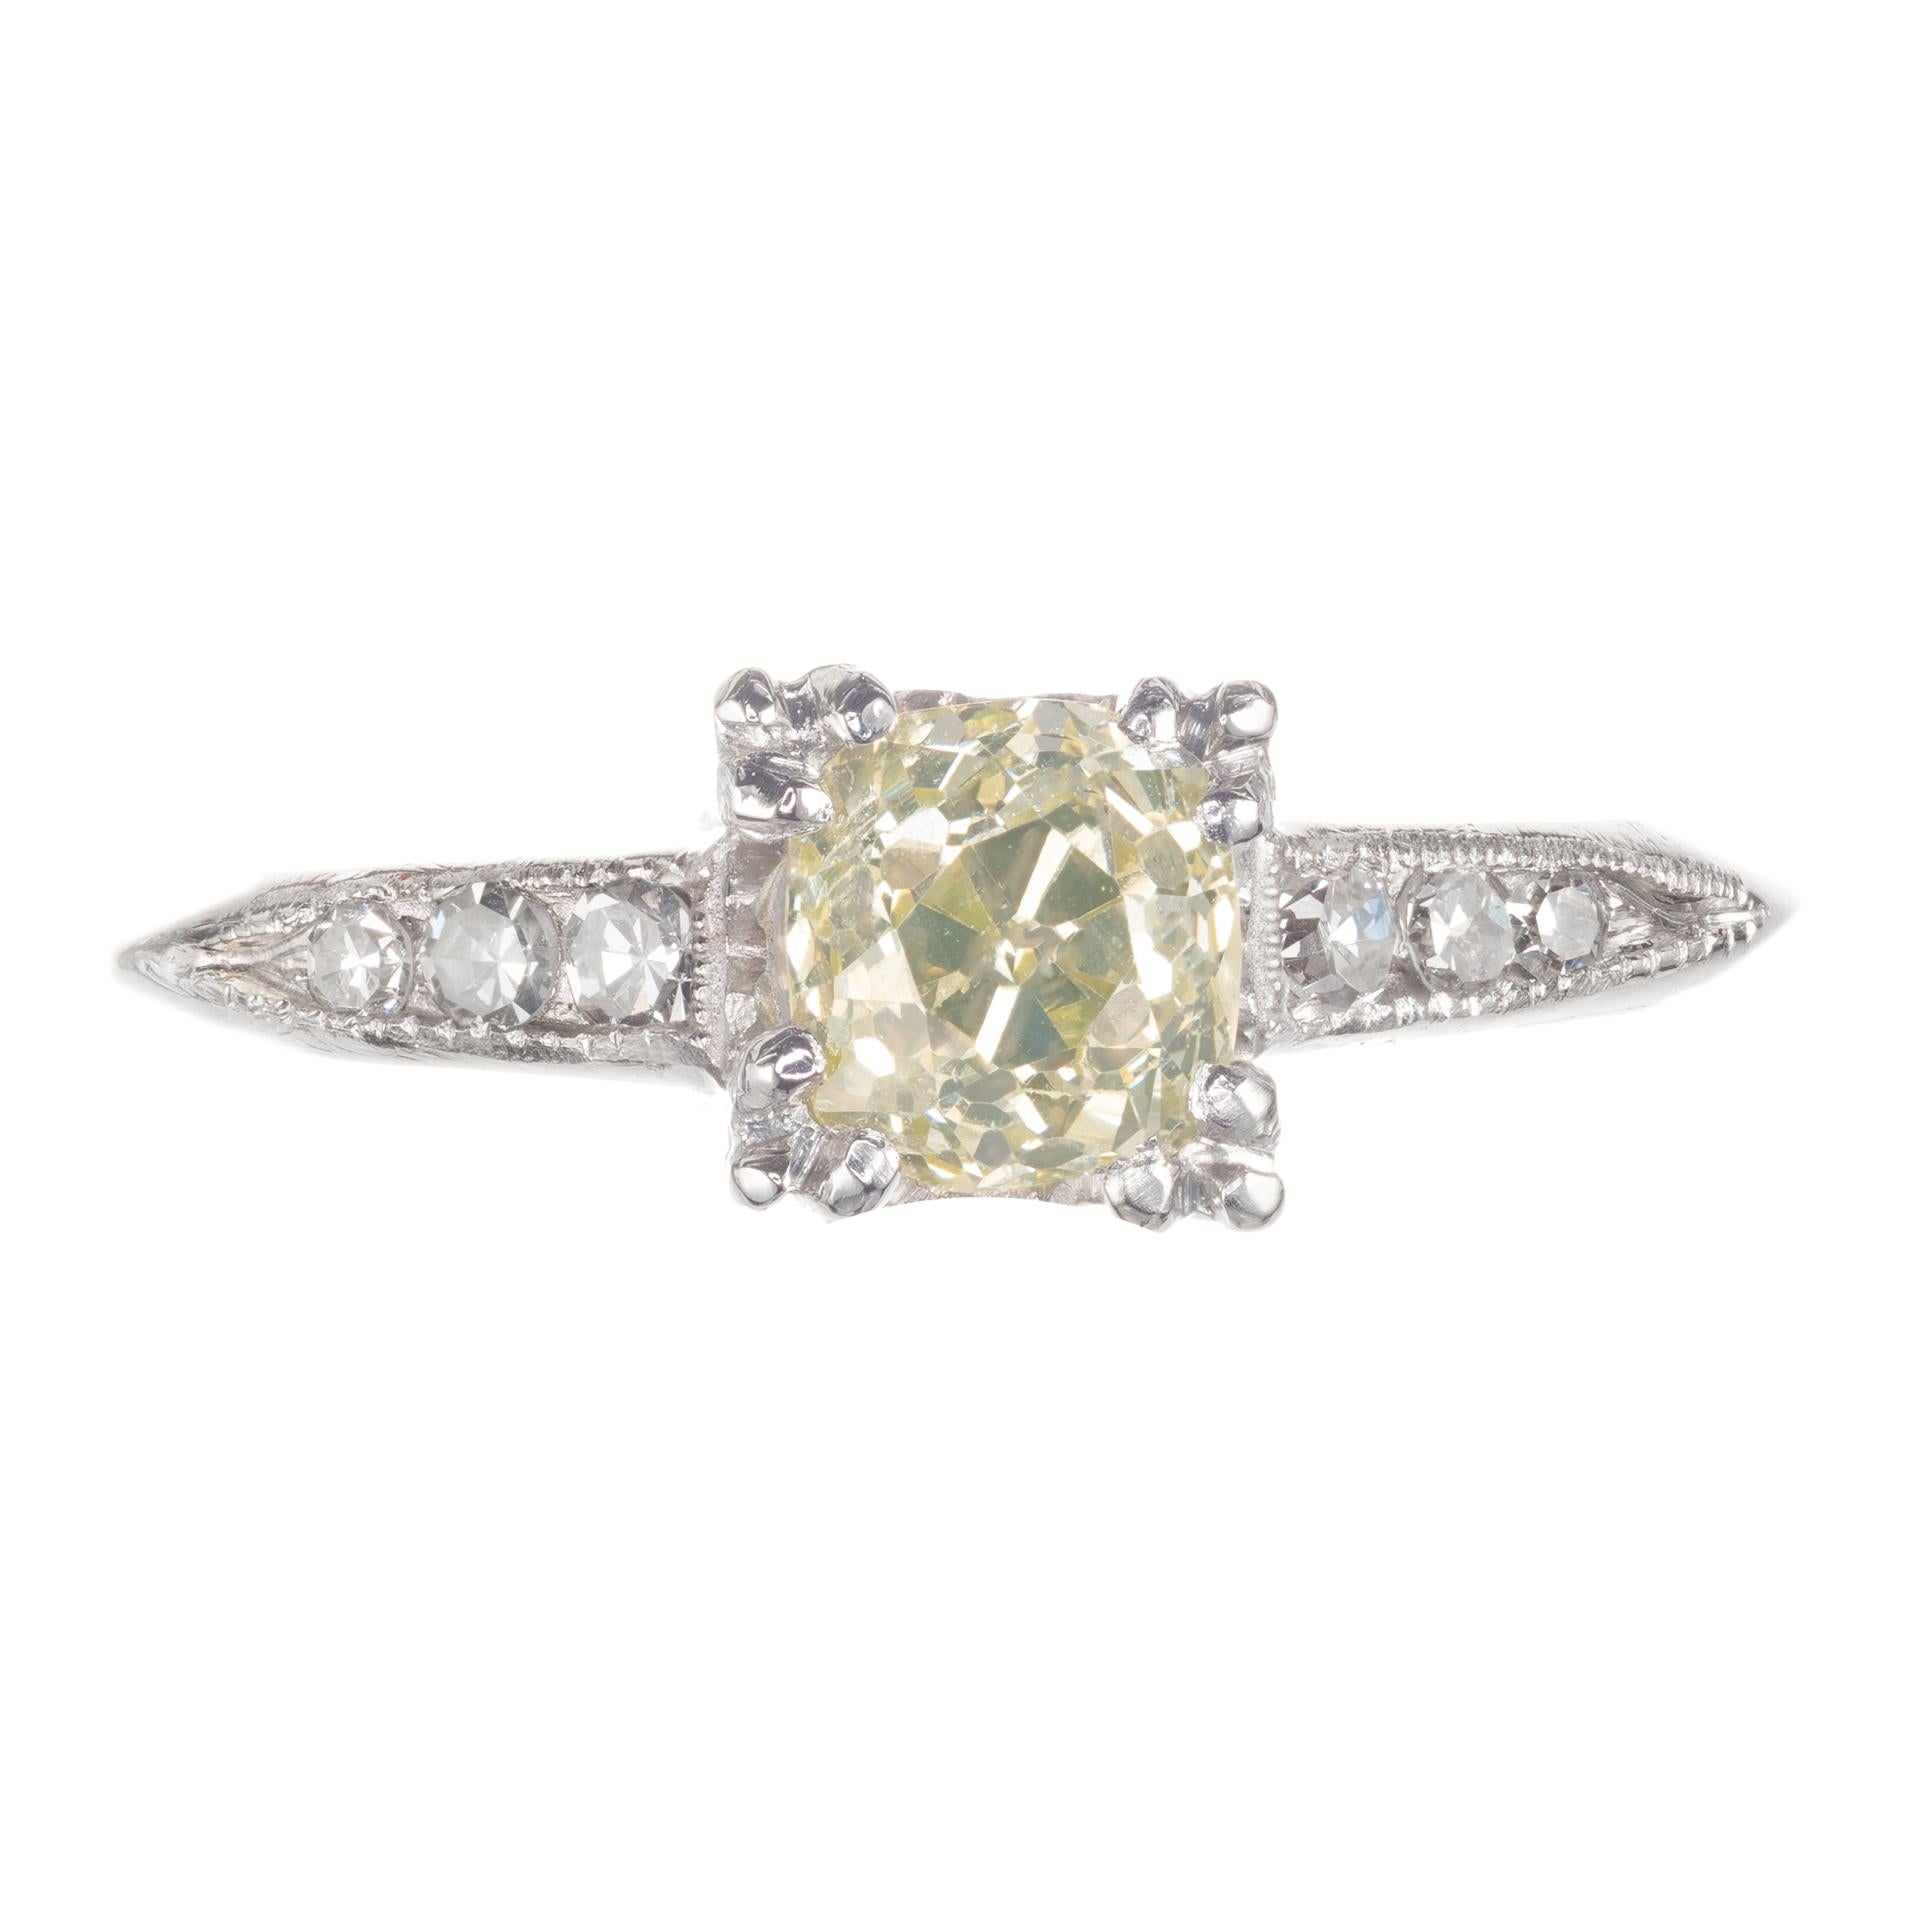 Original natural yellow and white diamond engagement ring. Old mine cut center stone with six single cut accent diamonds in a platinum setting. GIA certified. 

1 old mine cut fancy green/yellow SI diamond, Approximate .58cts GIA Certificate #